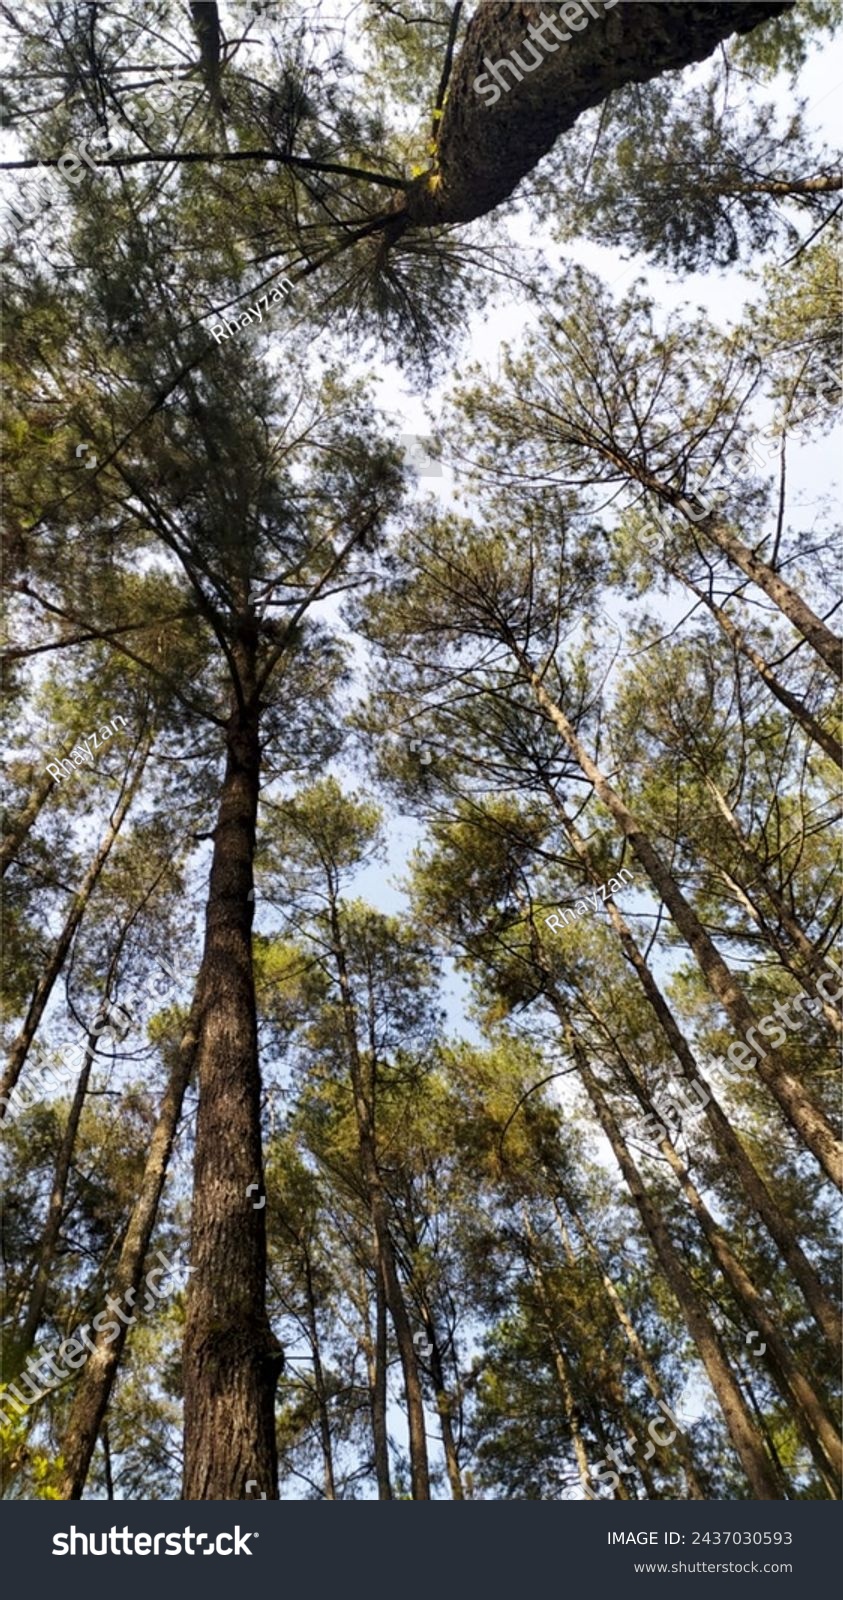 Pine forests are ecosystems dominated by pine trees, a type of coniferous tree that usually has leaves called needles.
In some places, pine forests are an important part of the natural landscape. #2437030593